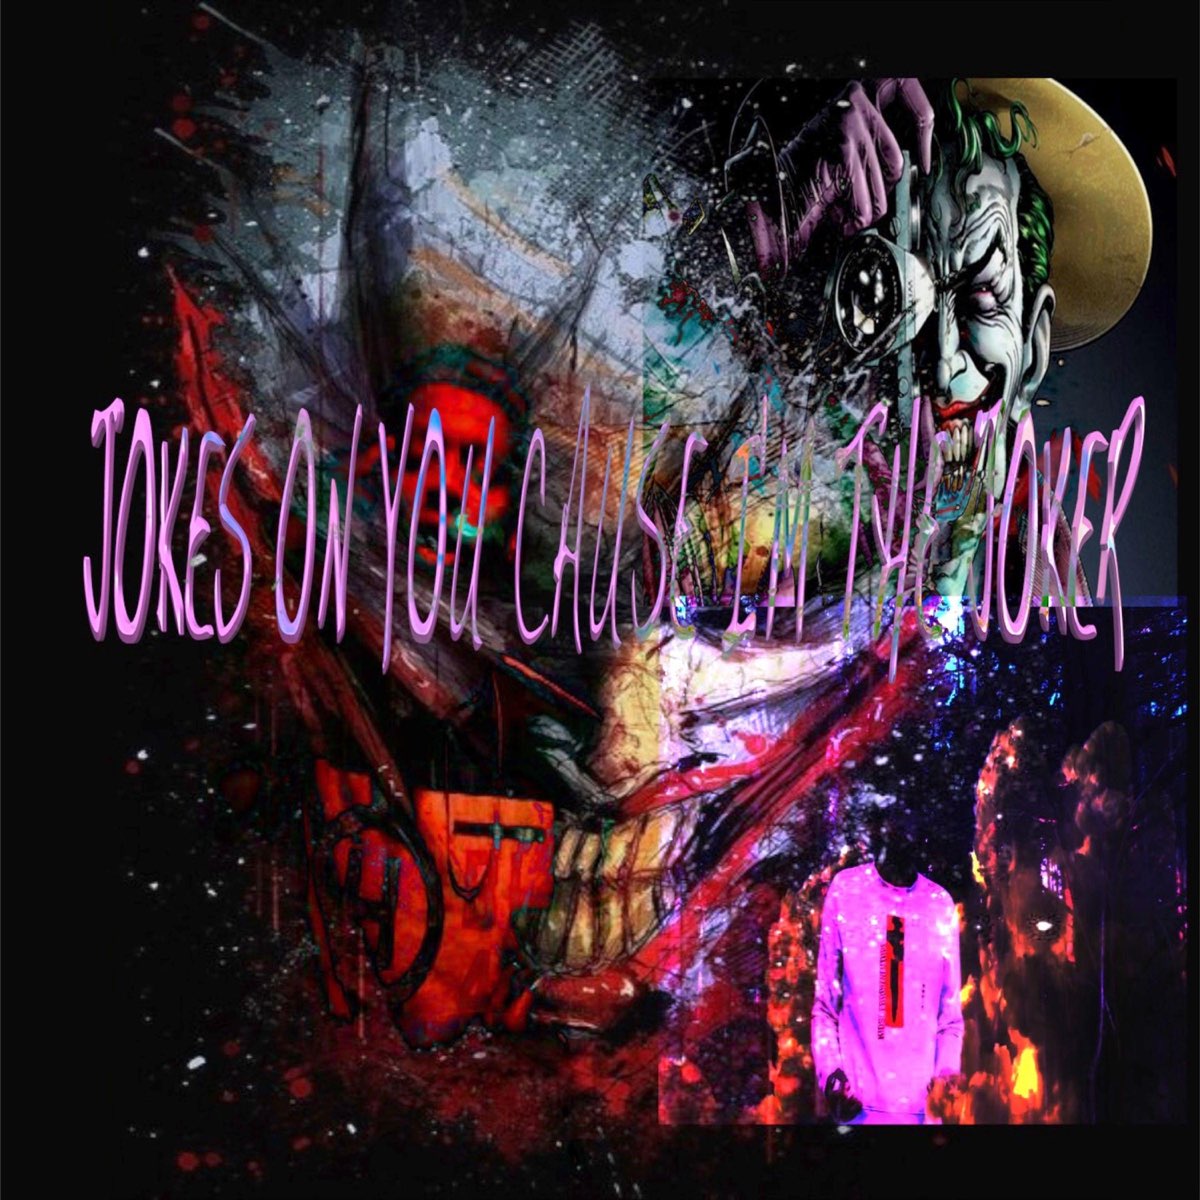 ‎Jokes On You Cause I'M the Joker - EP - Album by cloud315 - Apple Music